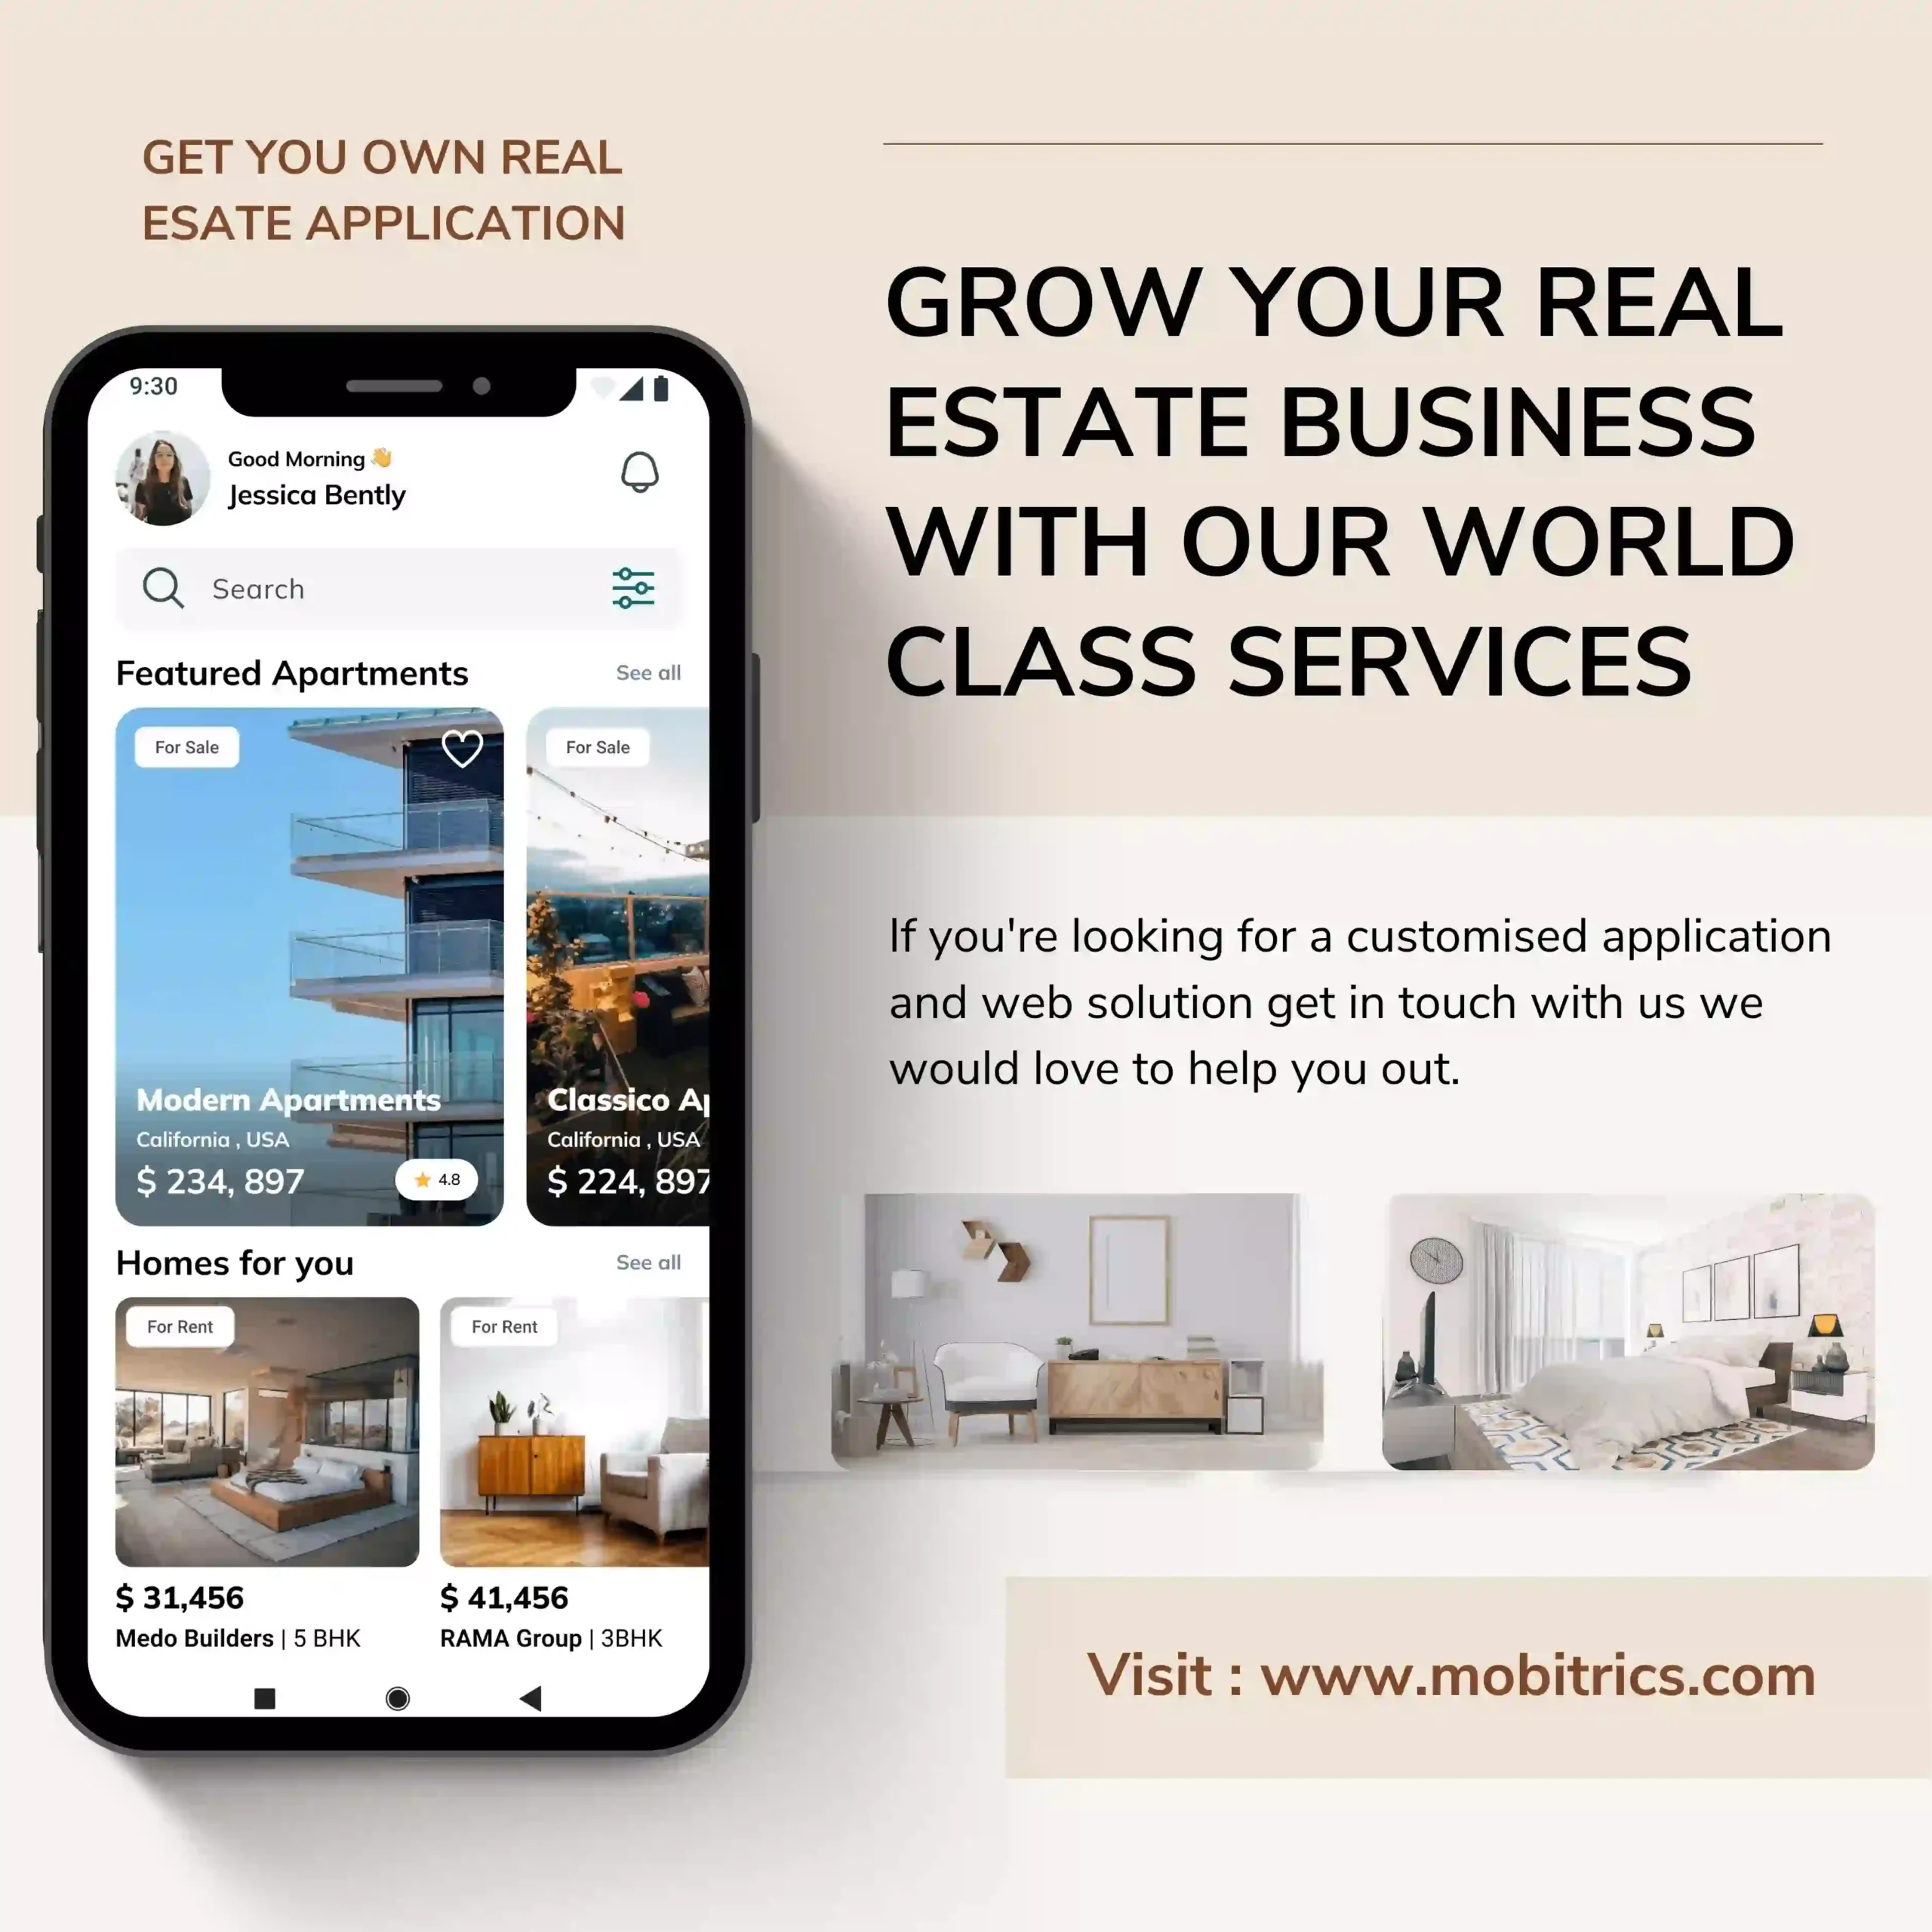 Find your ideal home with Mobitrics Real Estate App. Explore modern luxury apartments, seamless property search, and exclusive deals. Download now for a smarter, stress-free home-buying experience. #Mobitrics_RealEstate #HomeSearch #PropertyDeals